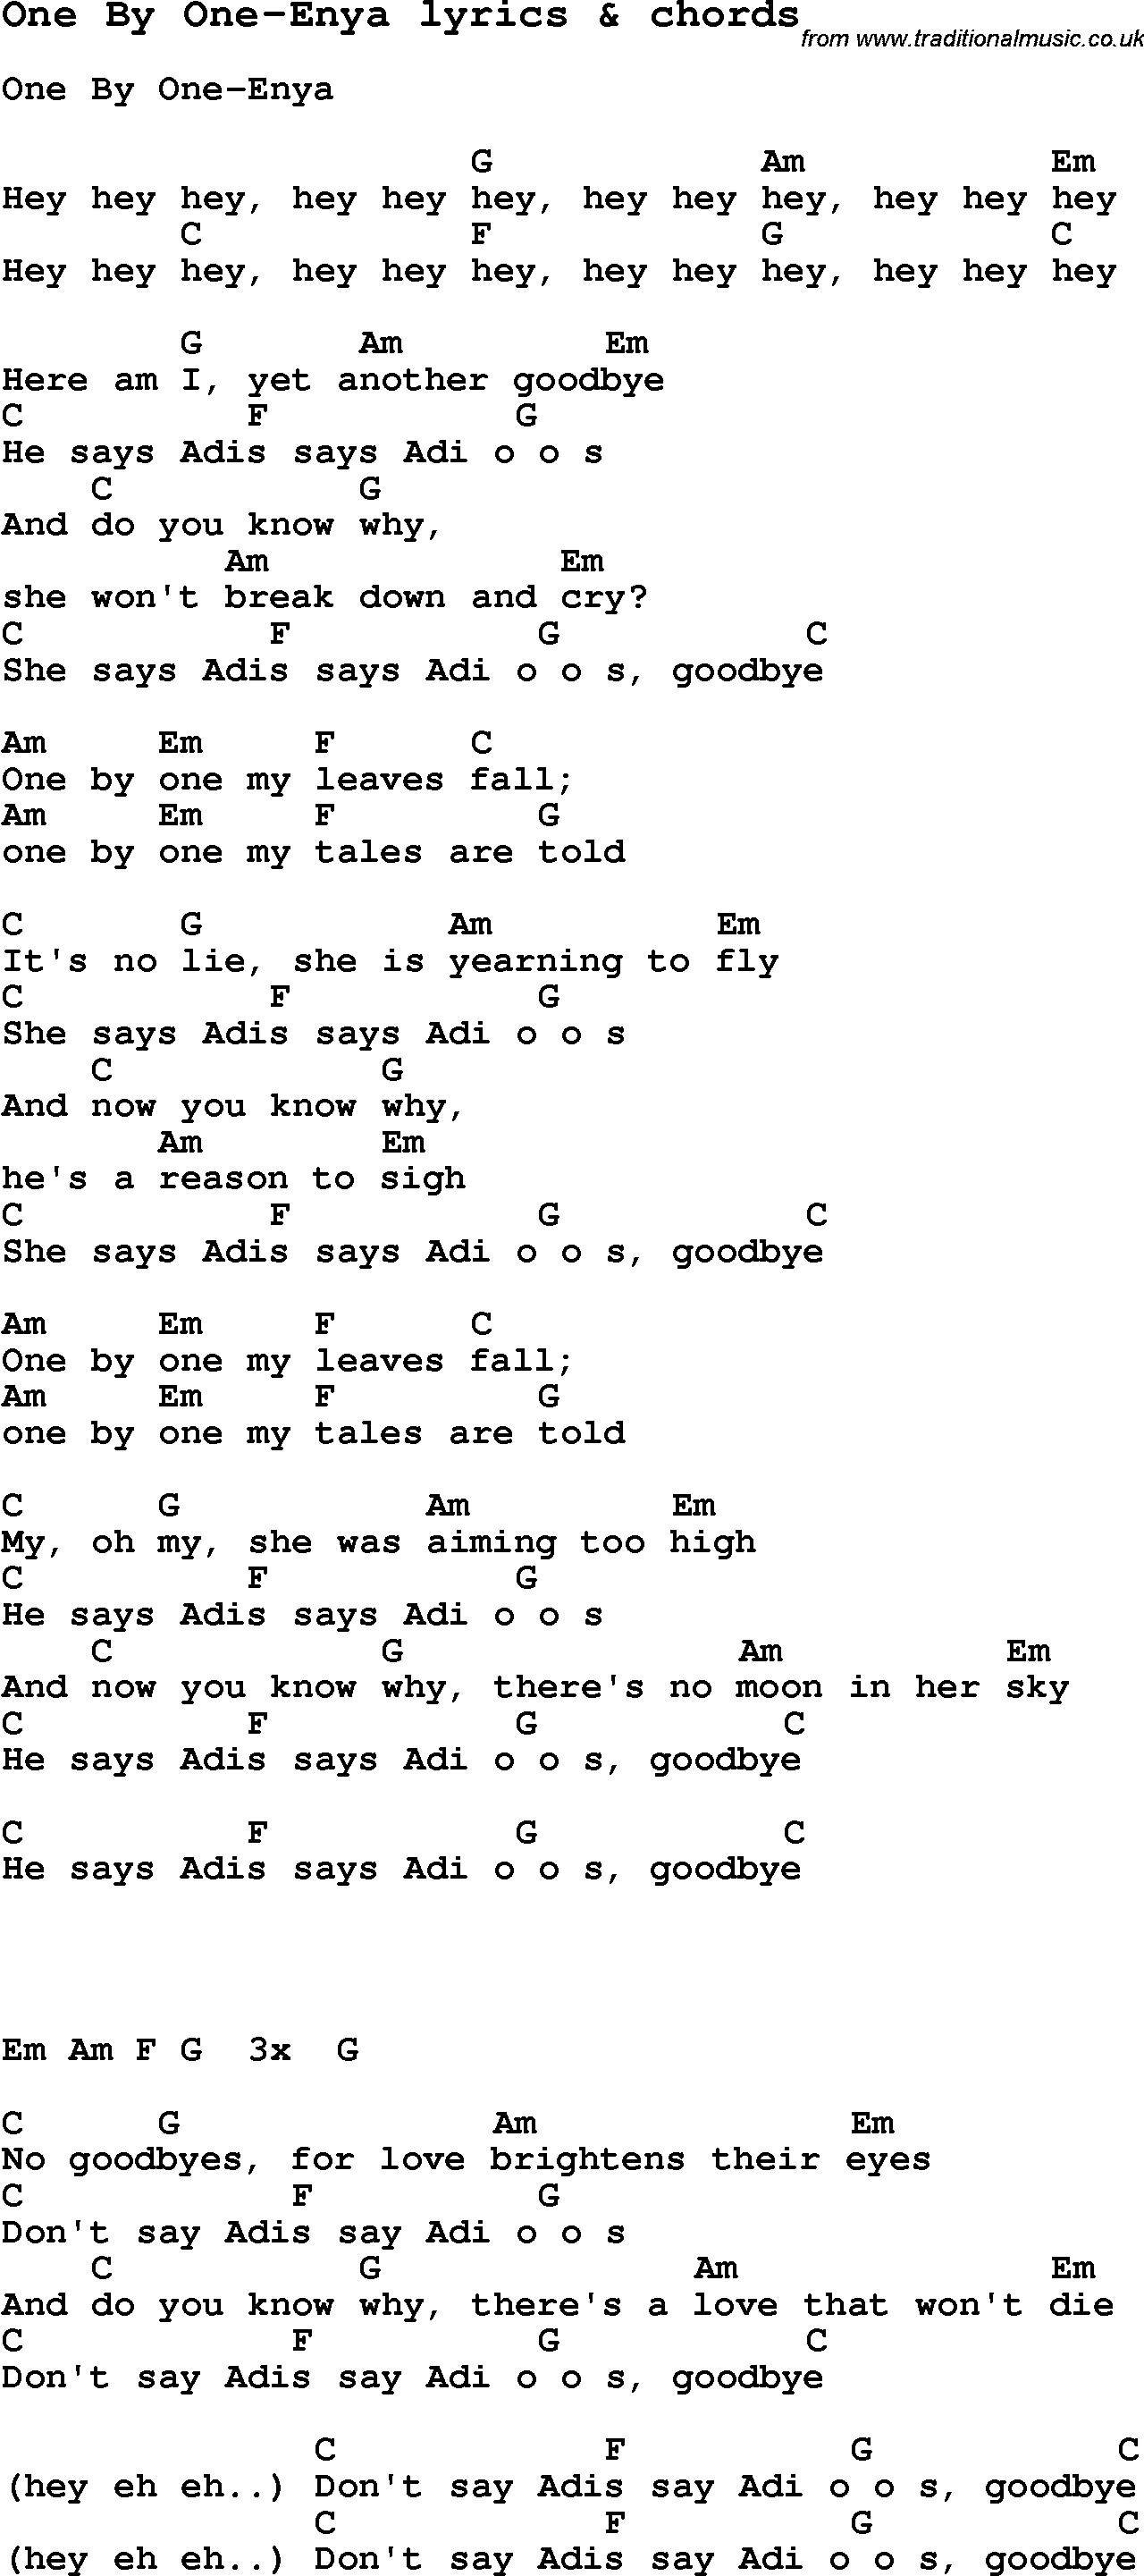 Love Song Lyrics for: One By One-Enya with chords for Ukulele, Guitar ...